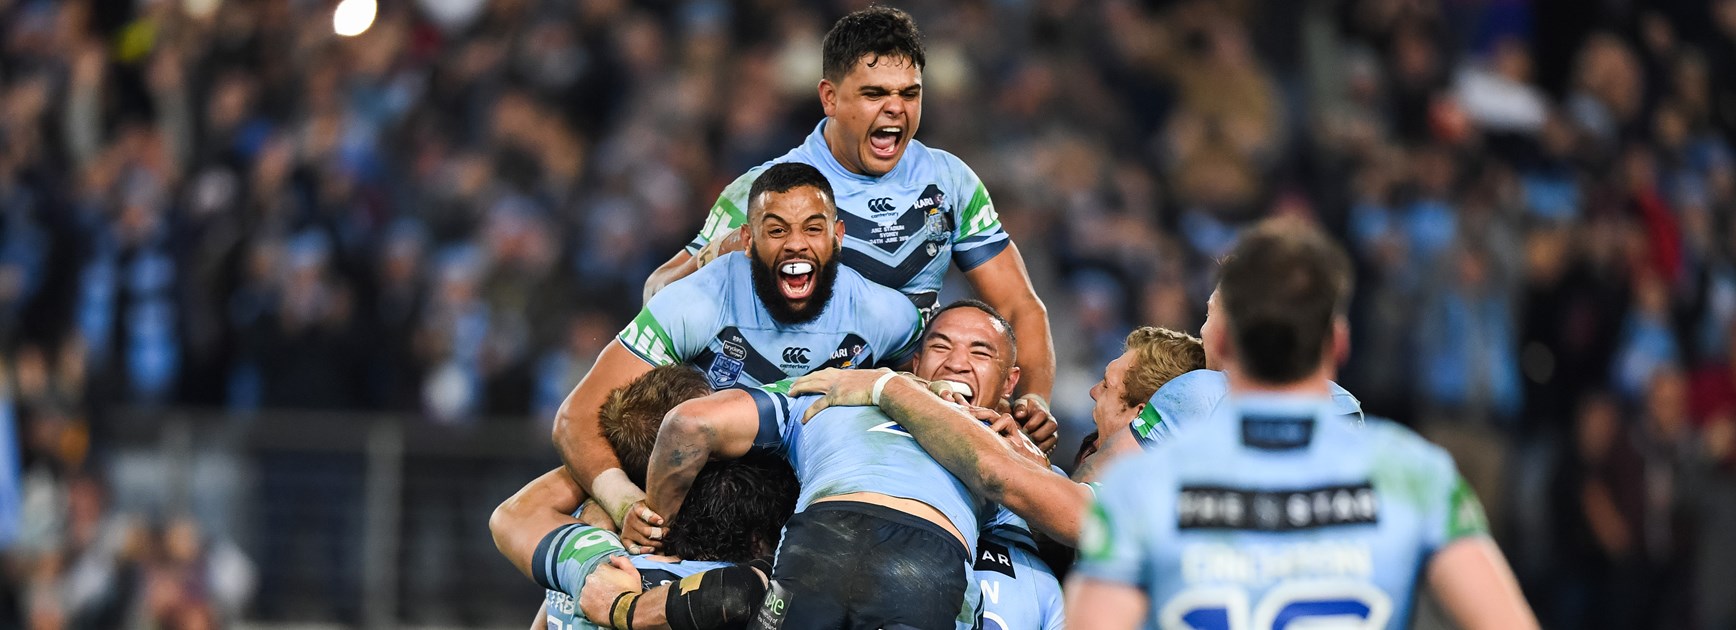 The Blues celebrate victory over Queensland in game two.